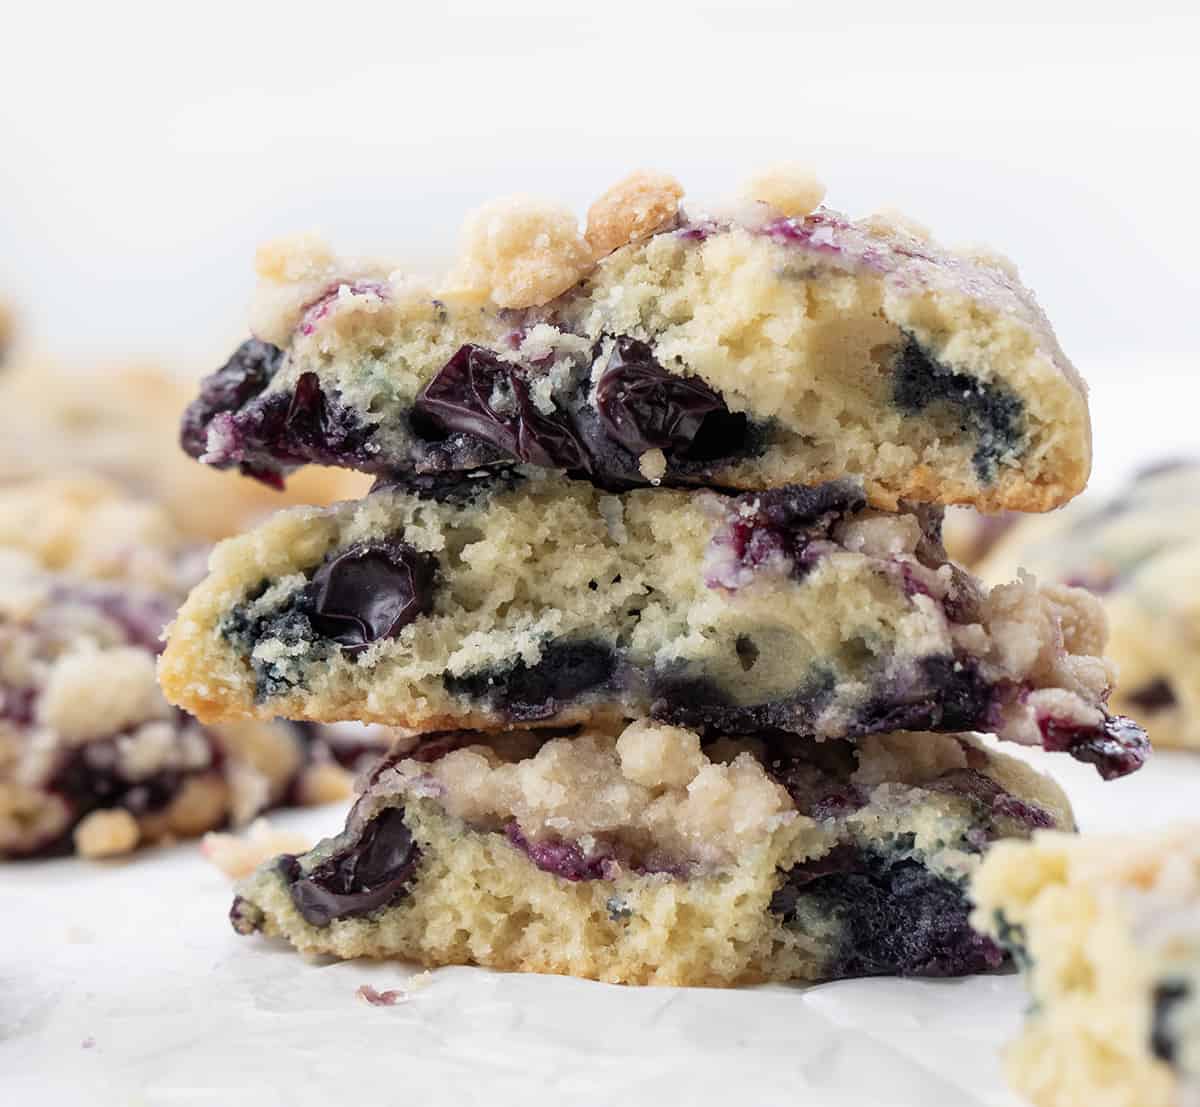 Blueberry Crumble Cake Cookies Broken in Half and Stacked, Showing Inside Texture.